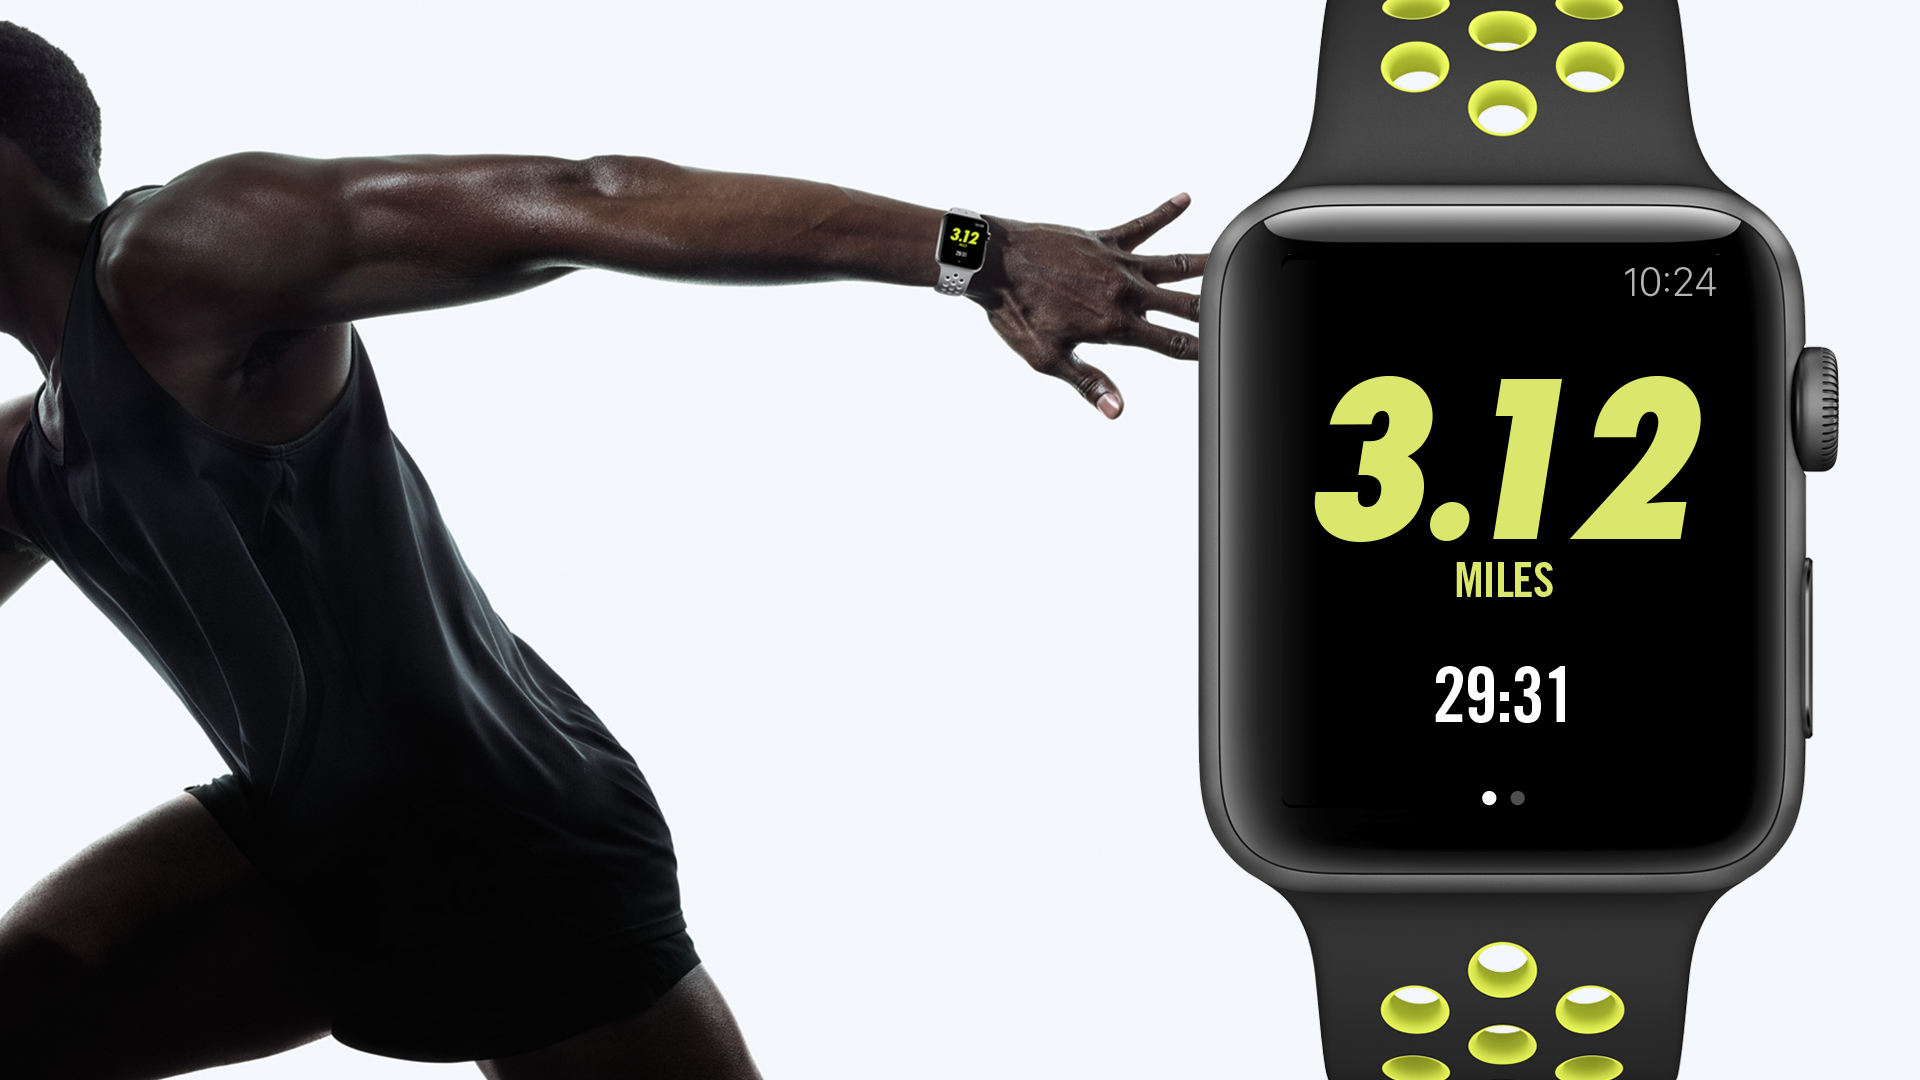 Made to enable athletes to run uninterrupted.